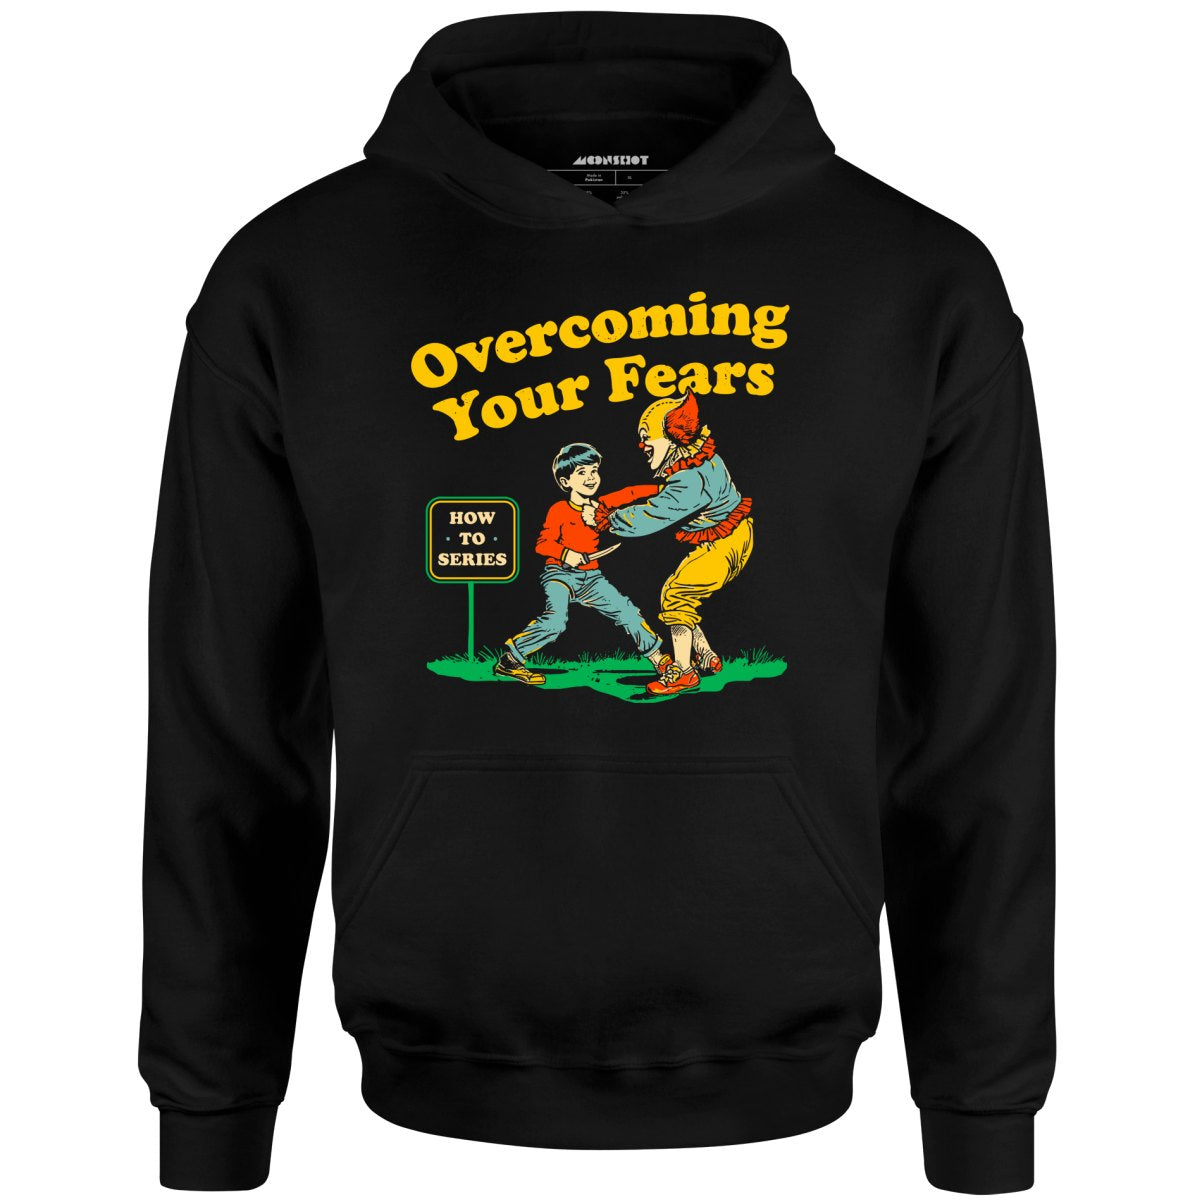 Overcoming Your Fears - Unisex Hoodie